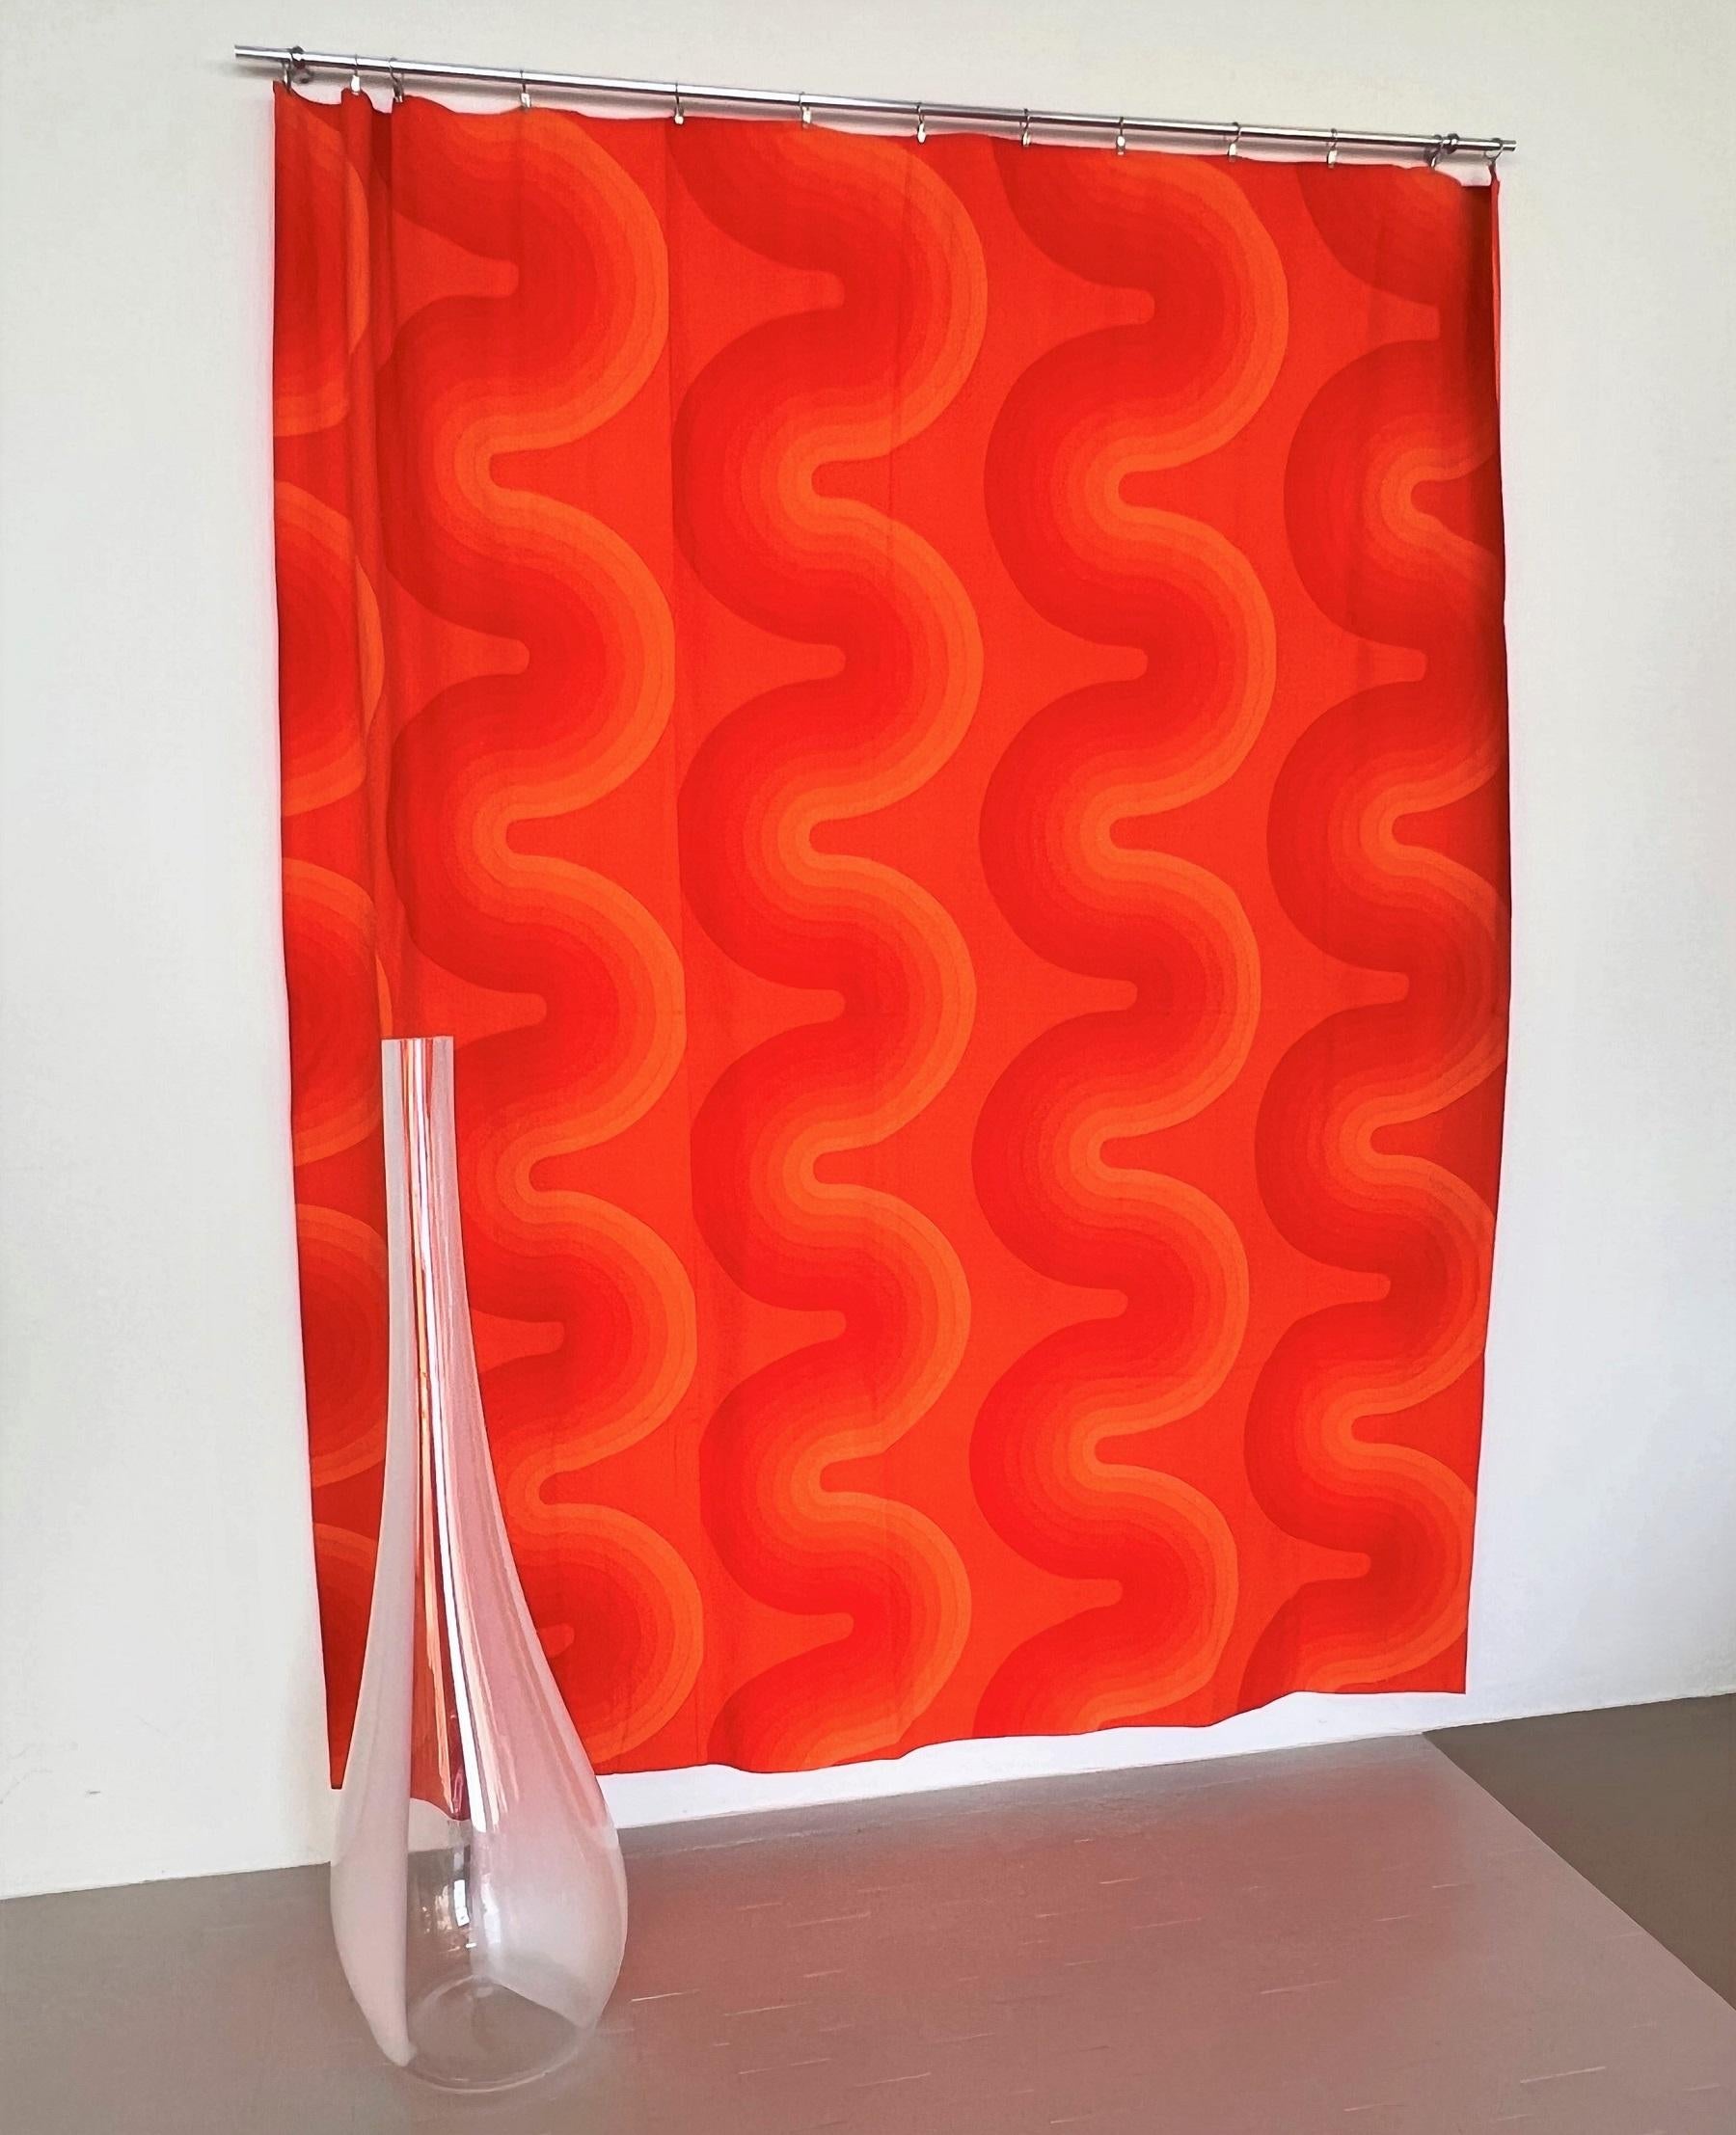 Swiss Verner Panton Original Fabric Panel Tapestry for Mira-X Collection, 1970s